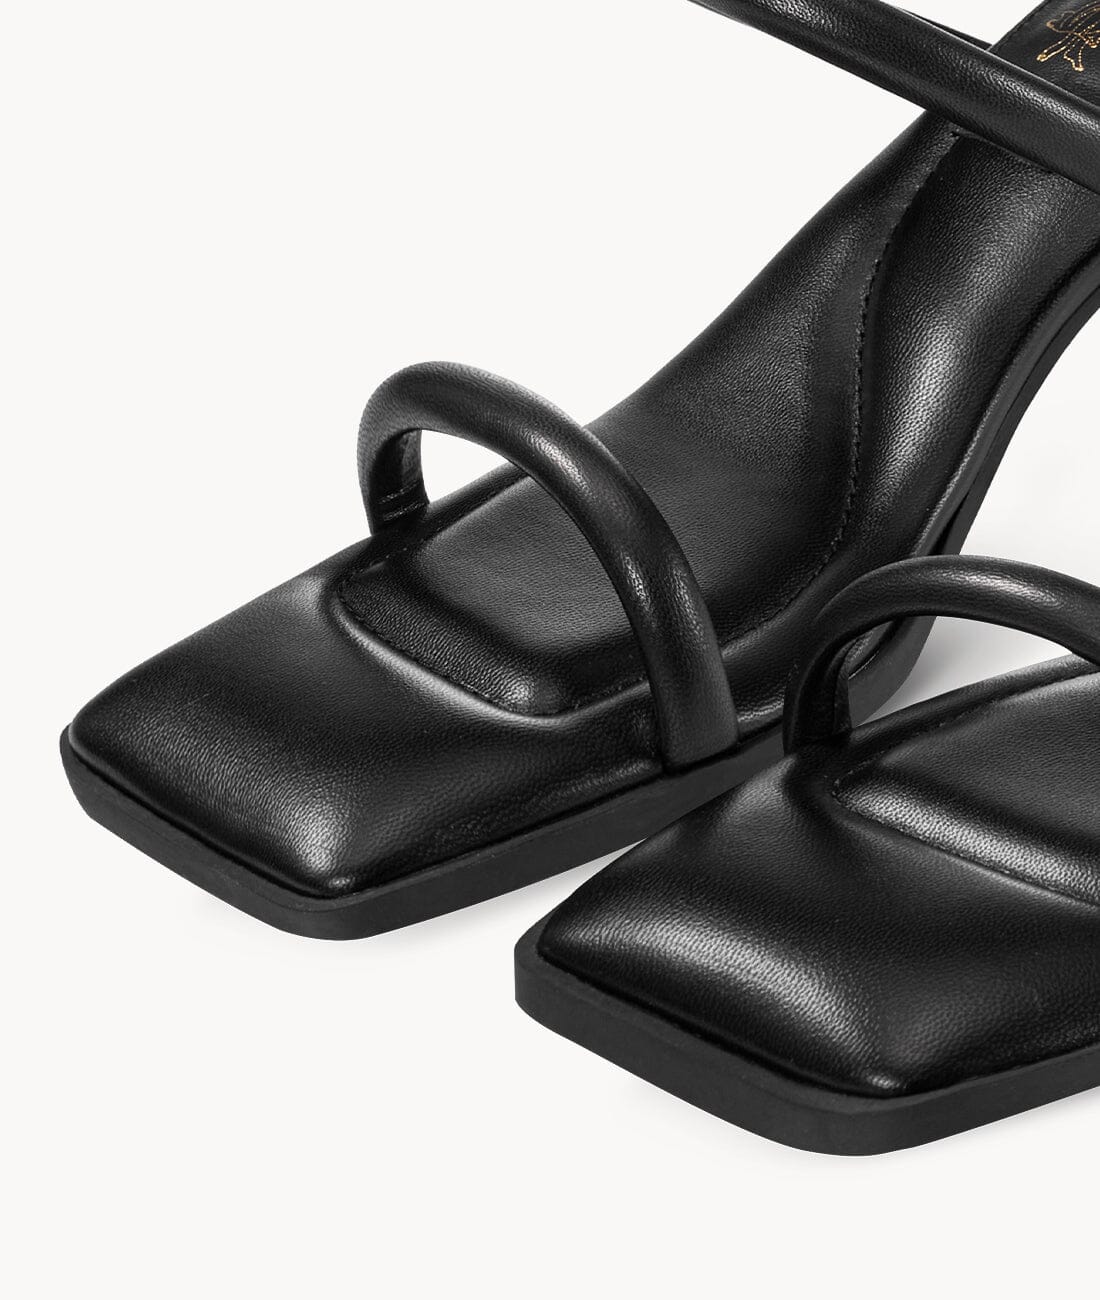 Black womens leather sandals